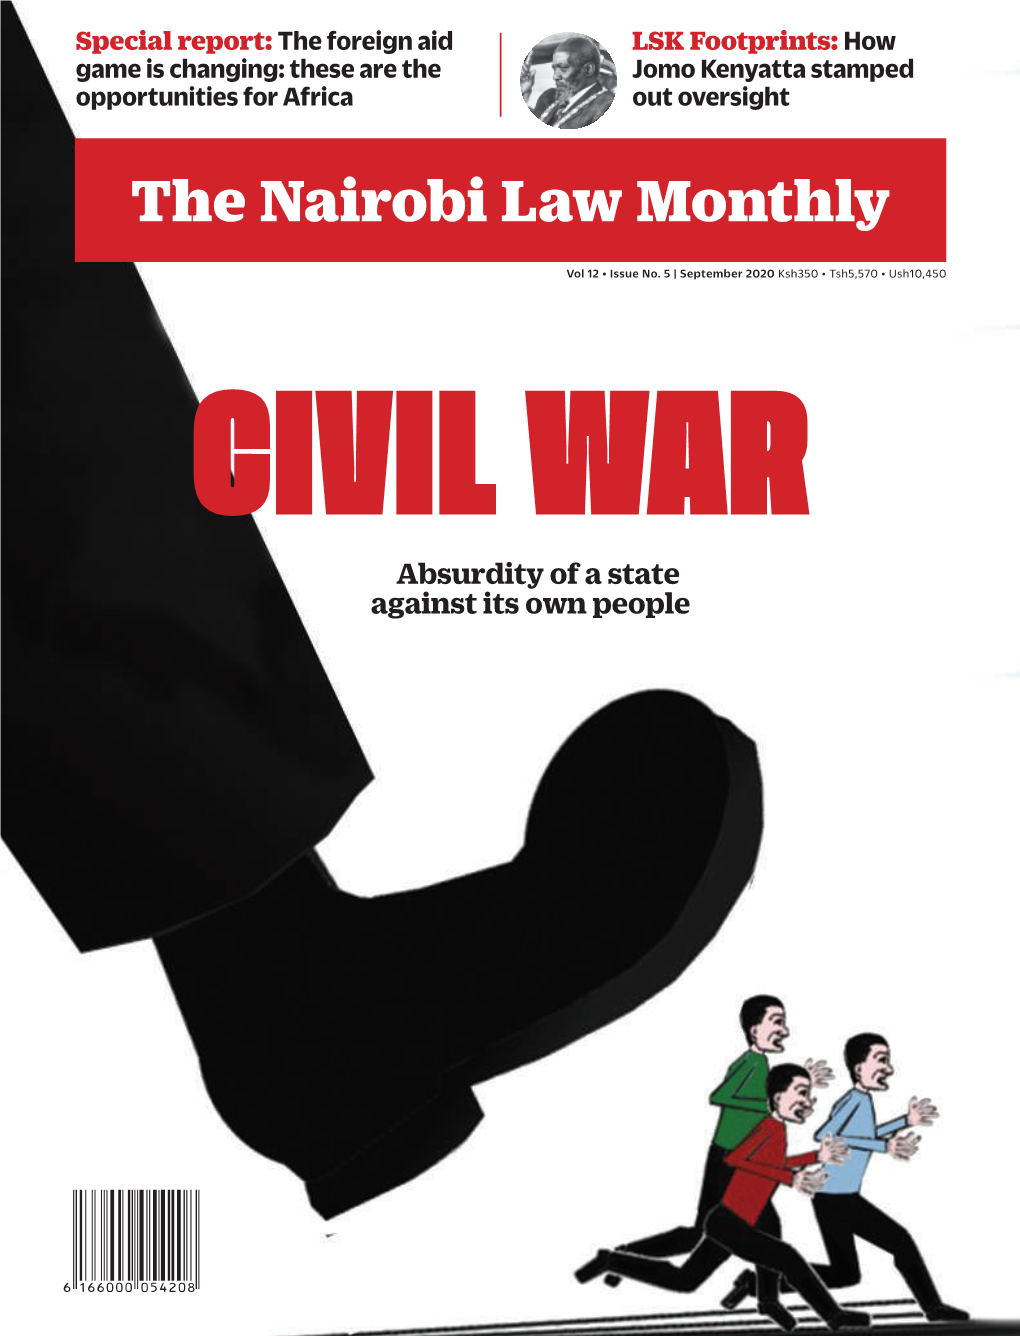 The Nairobi Law Monthly